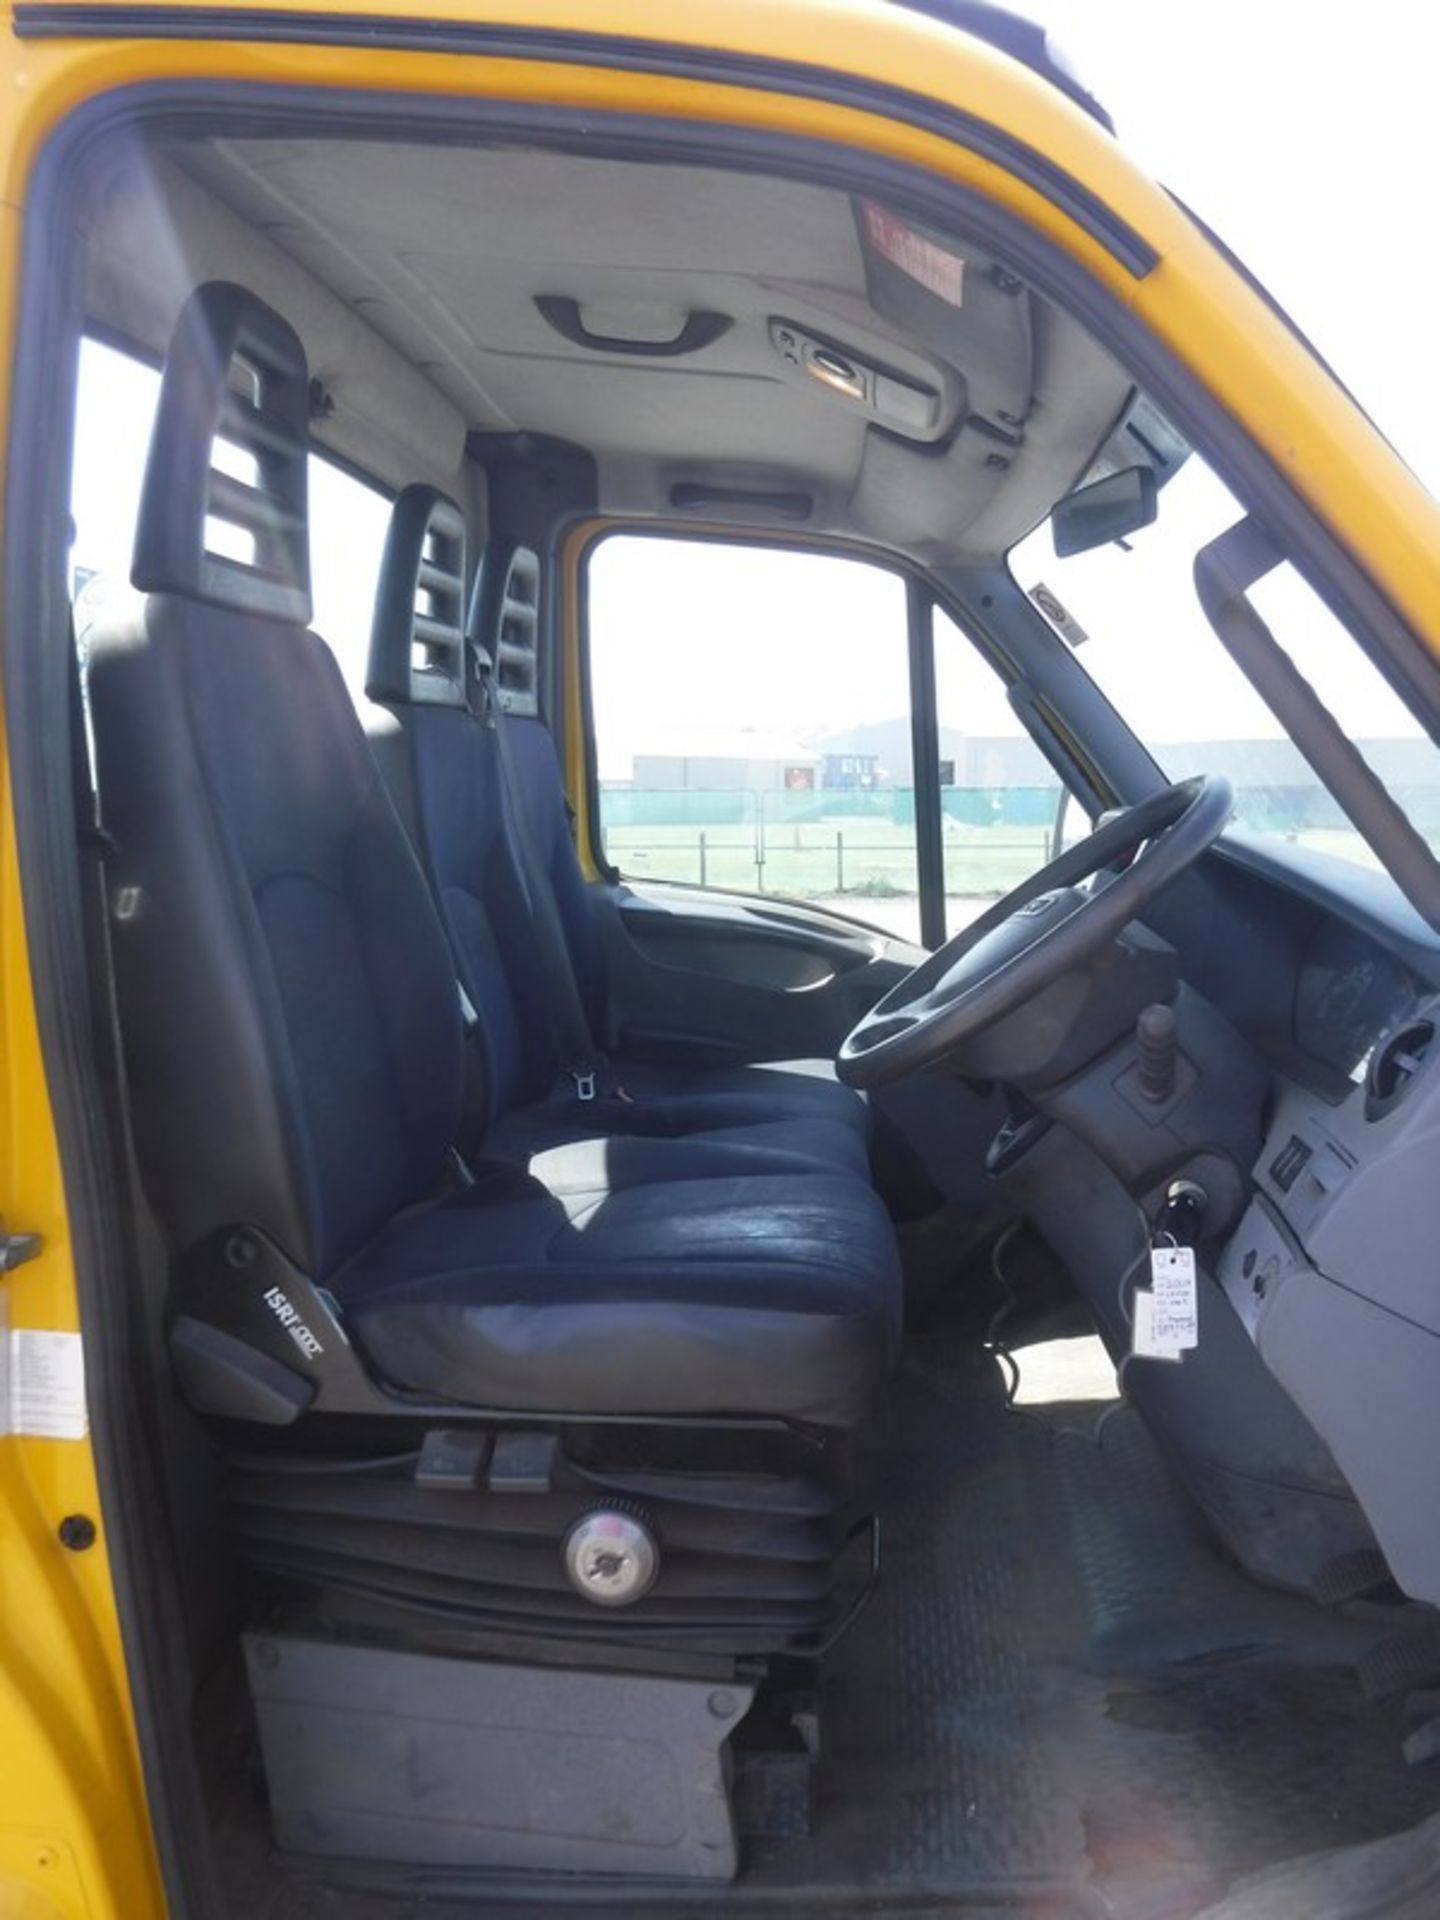 IVECO DAILY 65C18 - 2998cc - Image 2 of 30